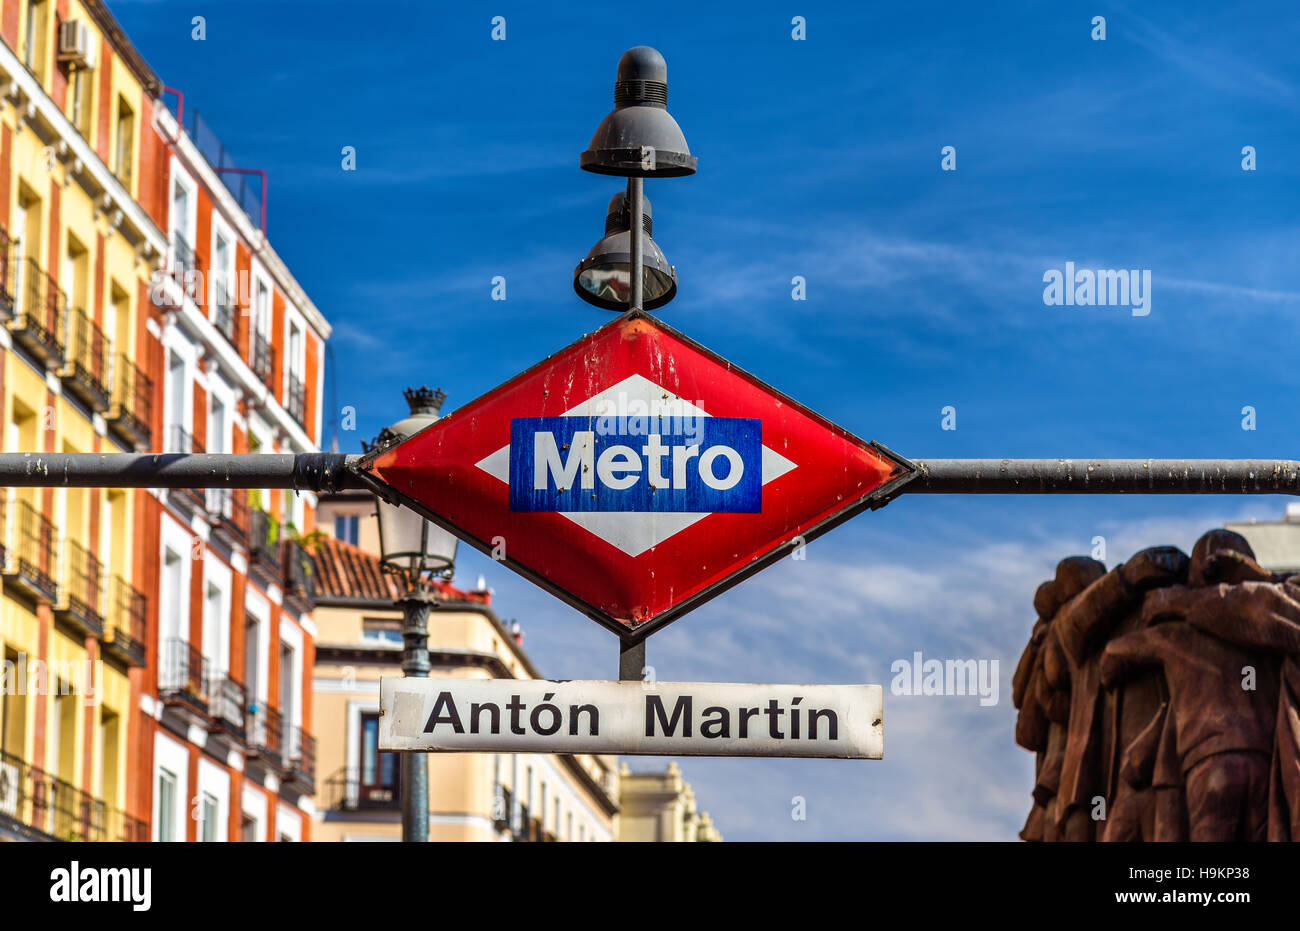 The Madrid Metro sign at the entrance to Anton Martin station Stock Photo